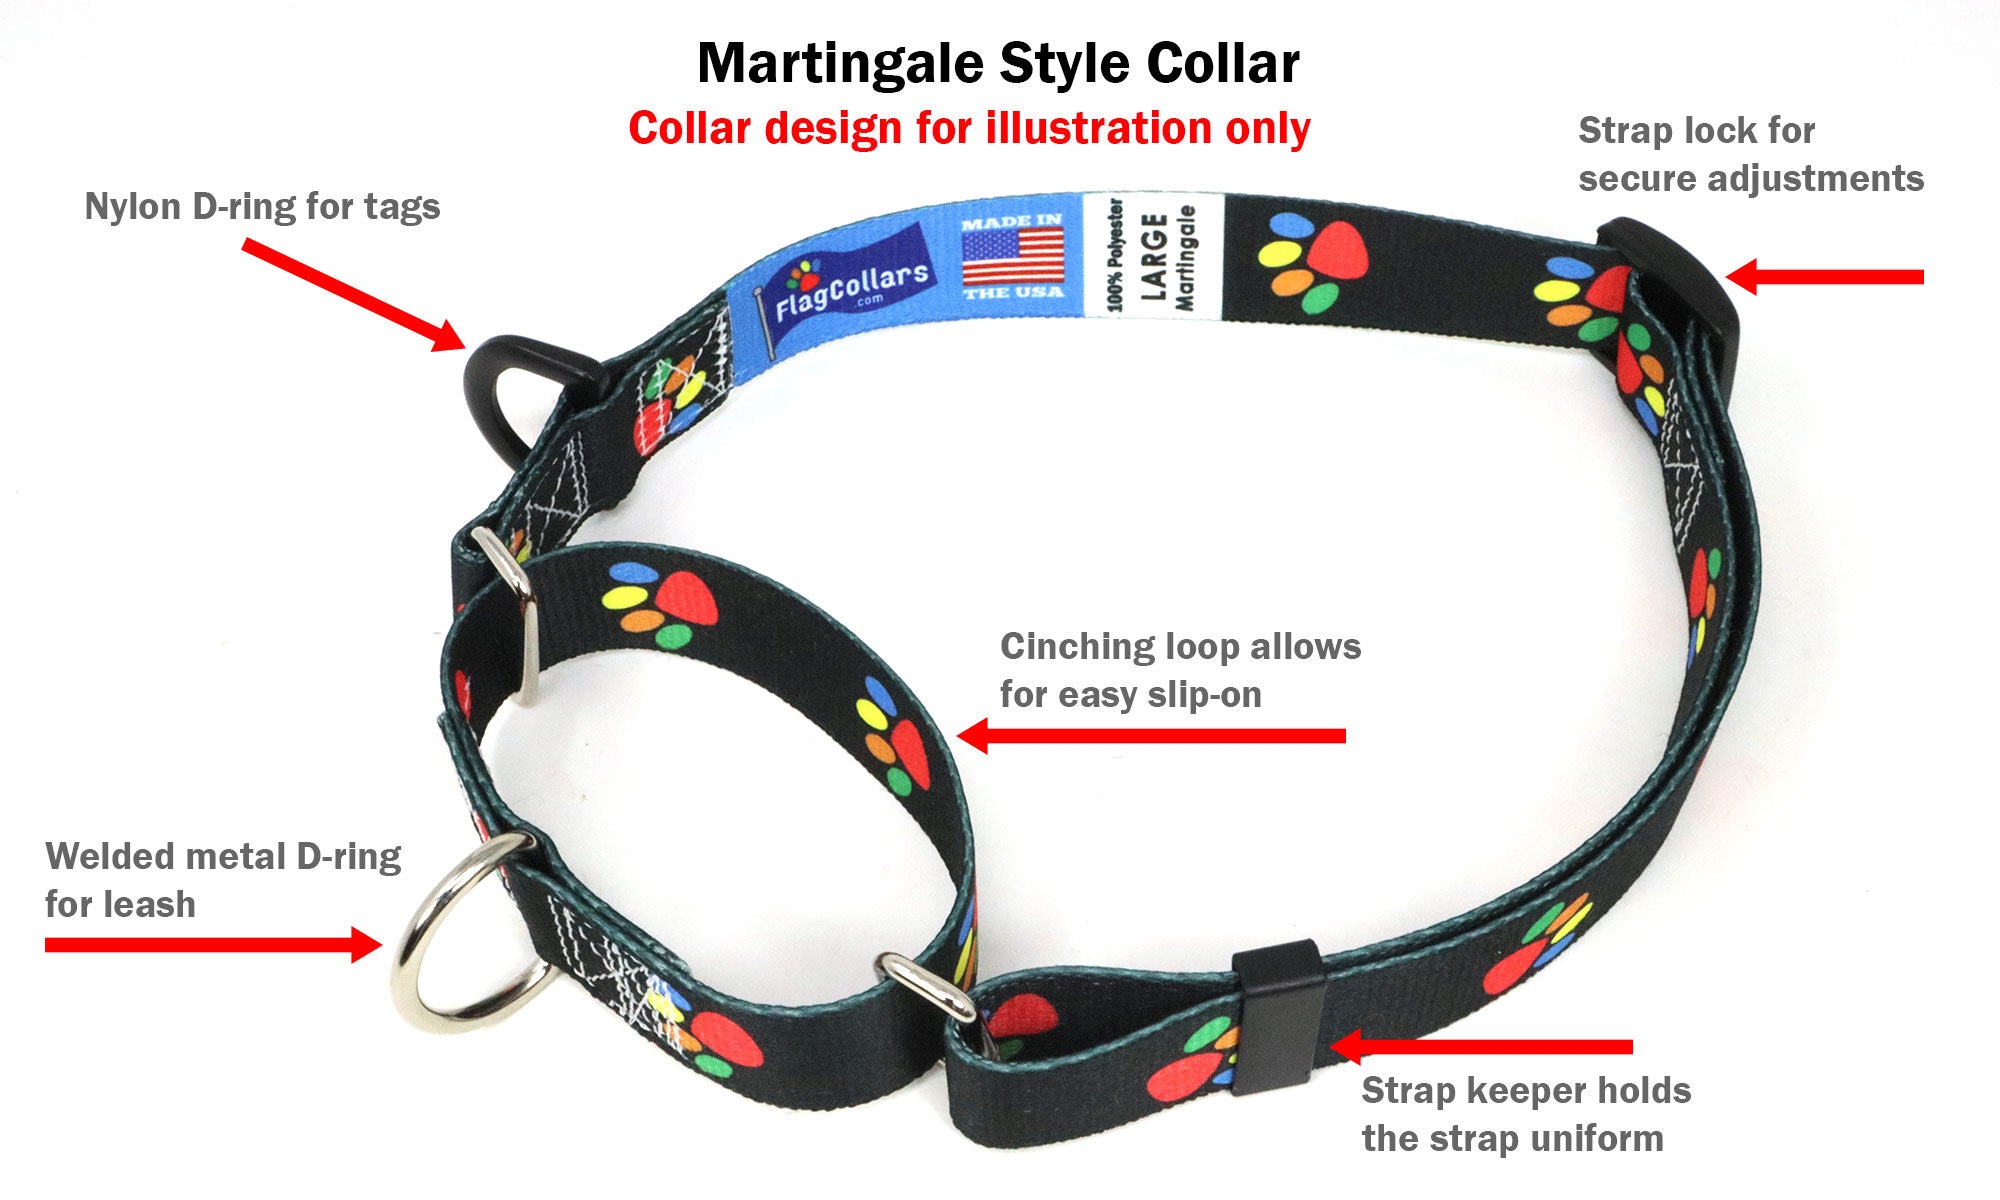 Democratic Republic of the Congo Dog Collar | Quick Release or Martingale Style | Made in NJ, USA